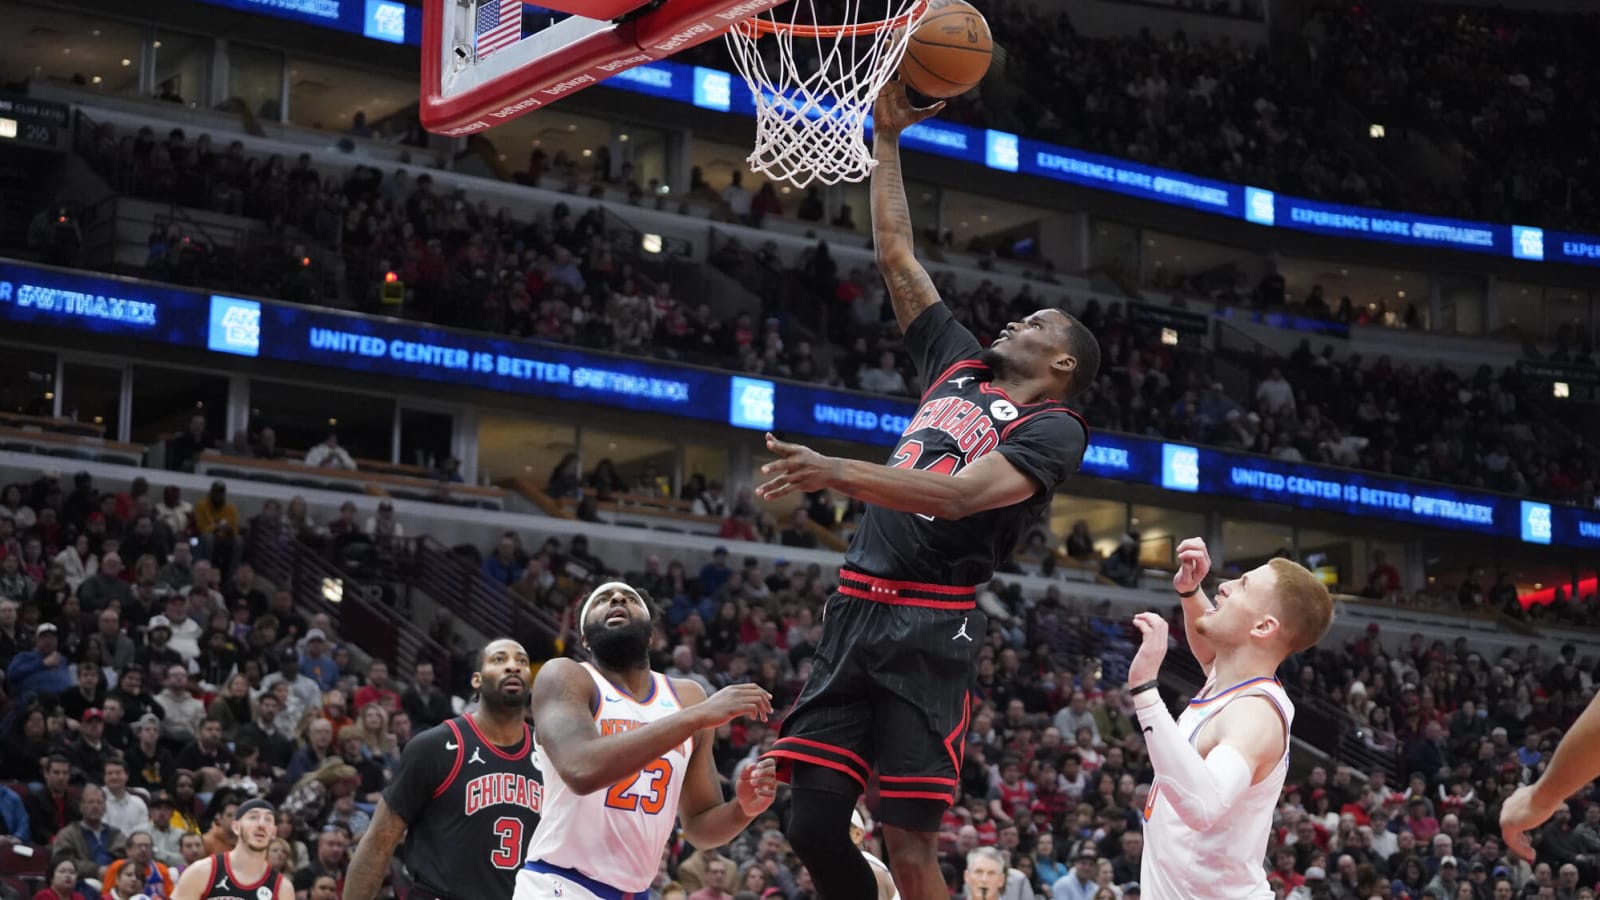 Bulls Outshine Knicks in a Thrilling Encounter